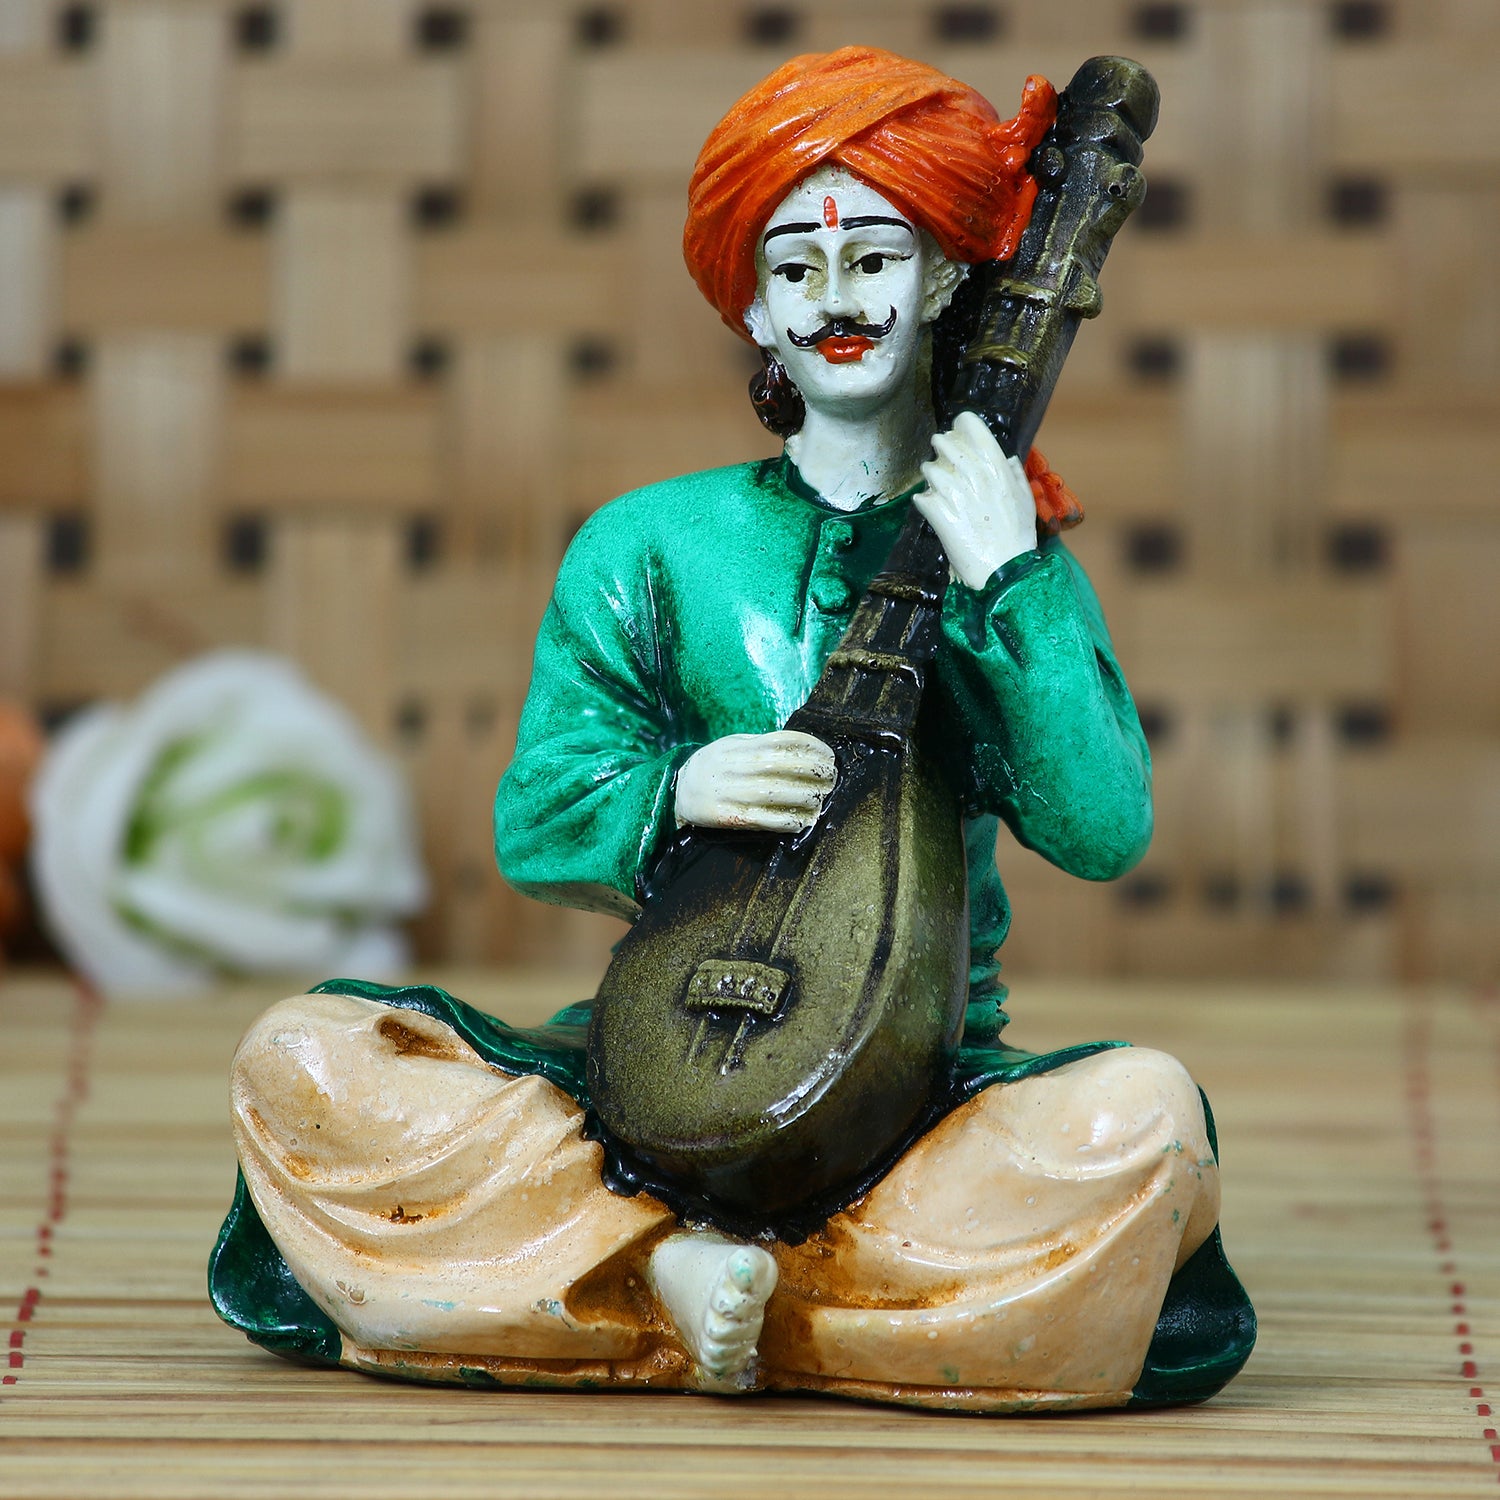 Polyresin Rajasthani Men playing Sitar Musical Instrument Handcrafted Decorative Showpiece 1